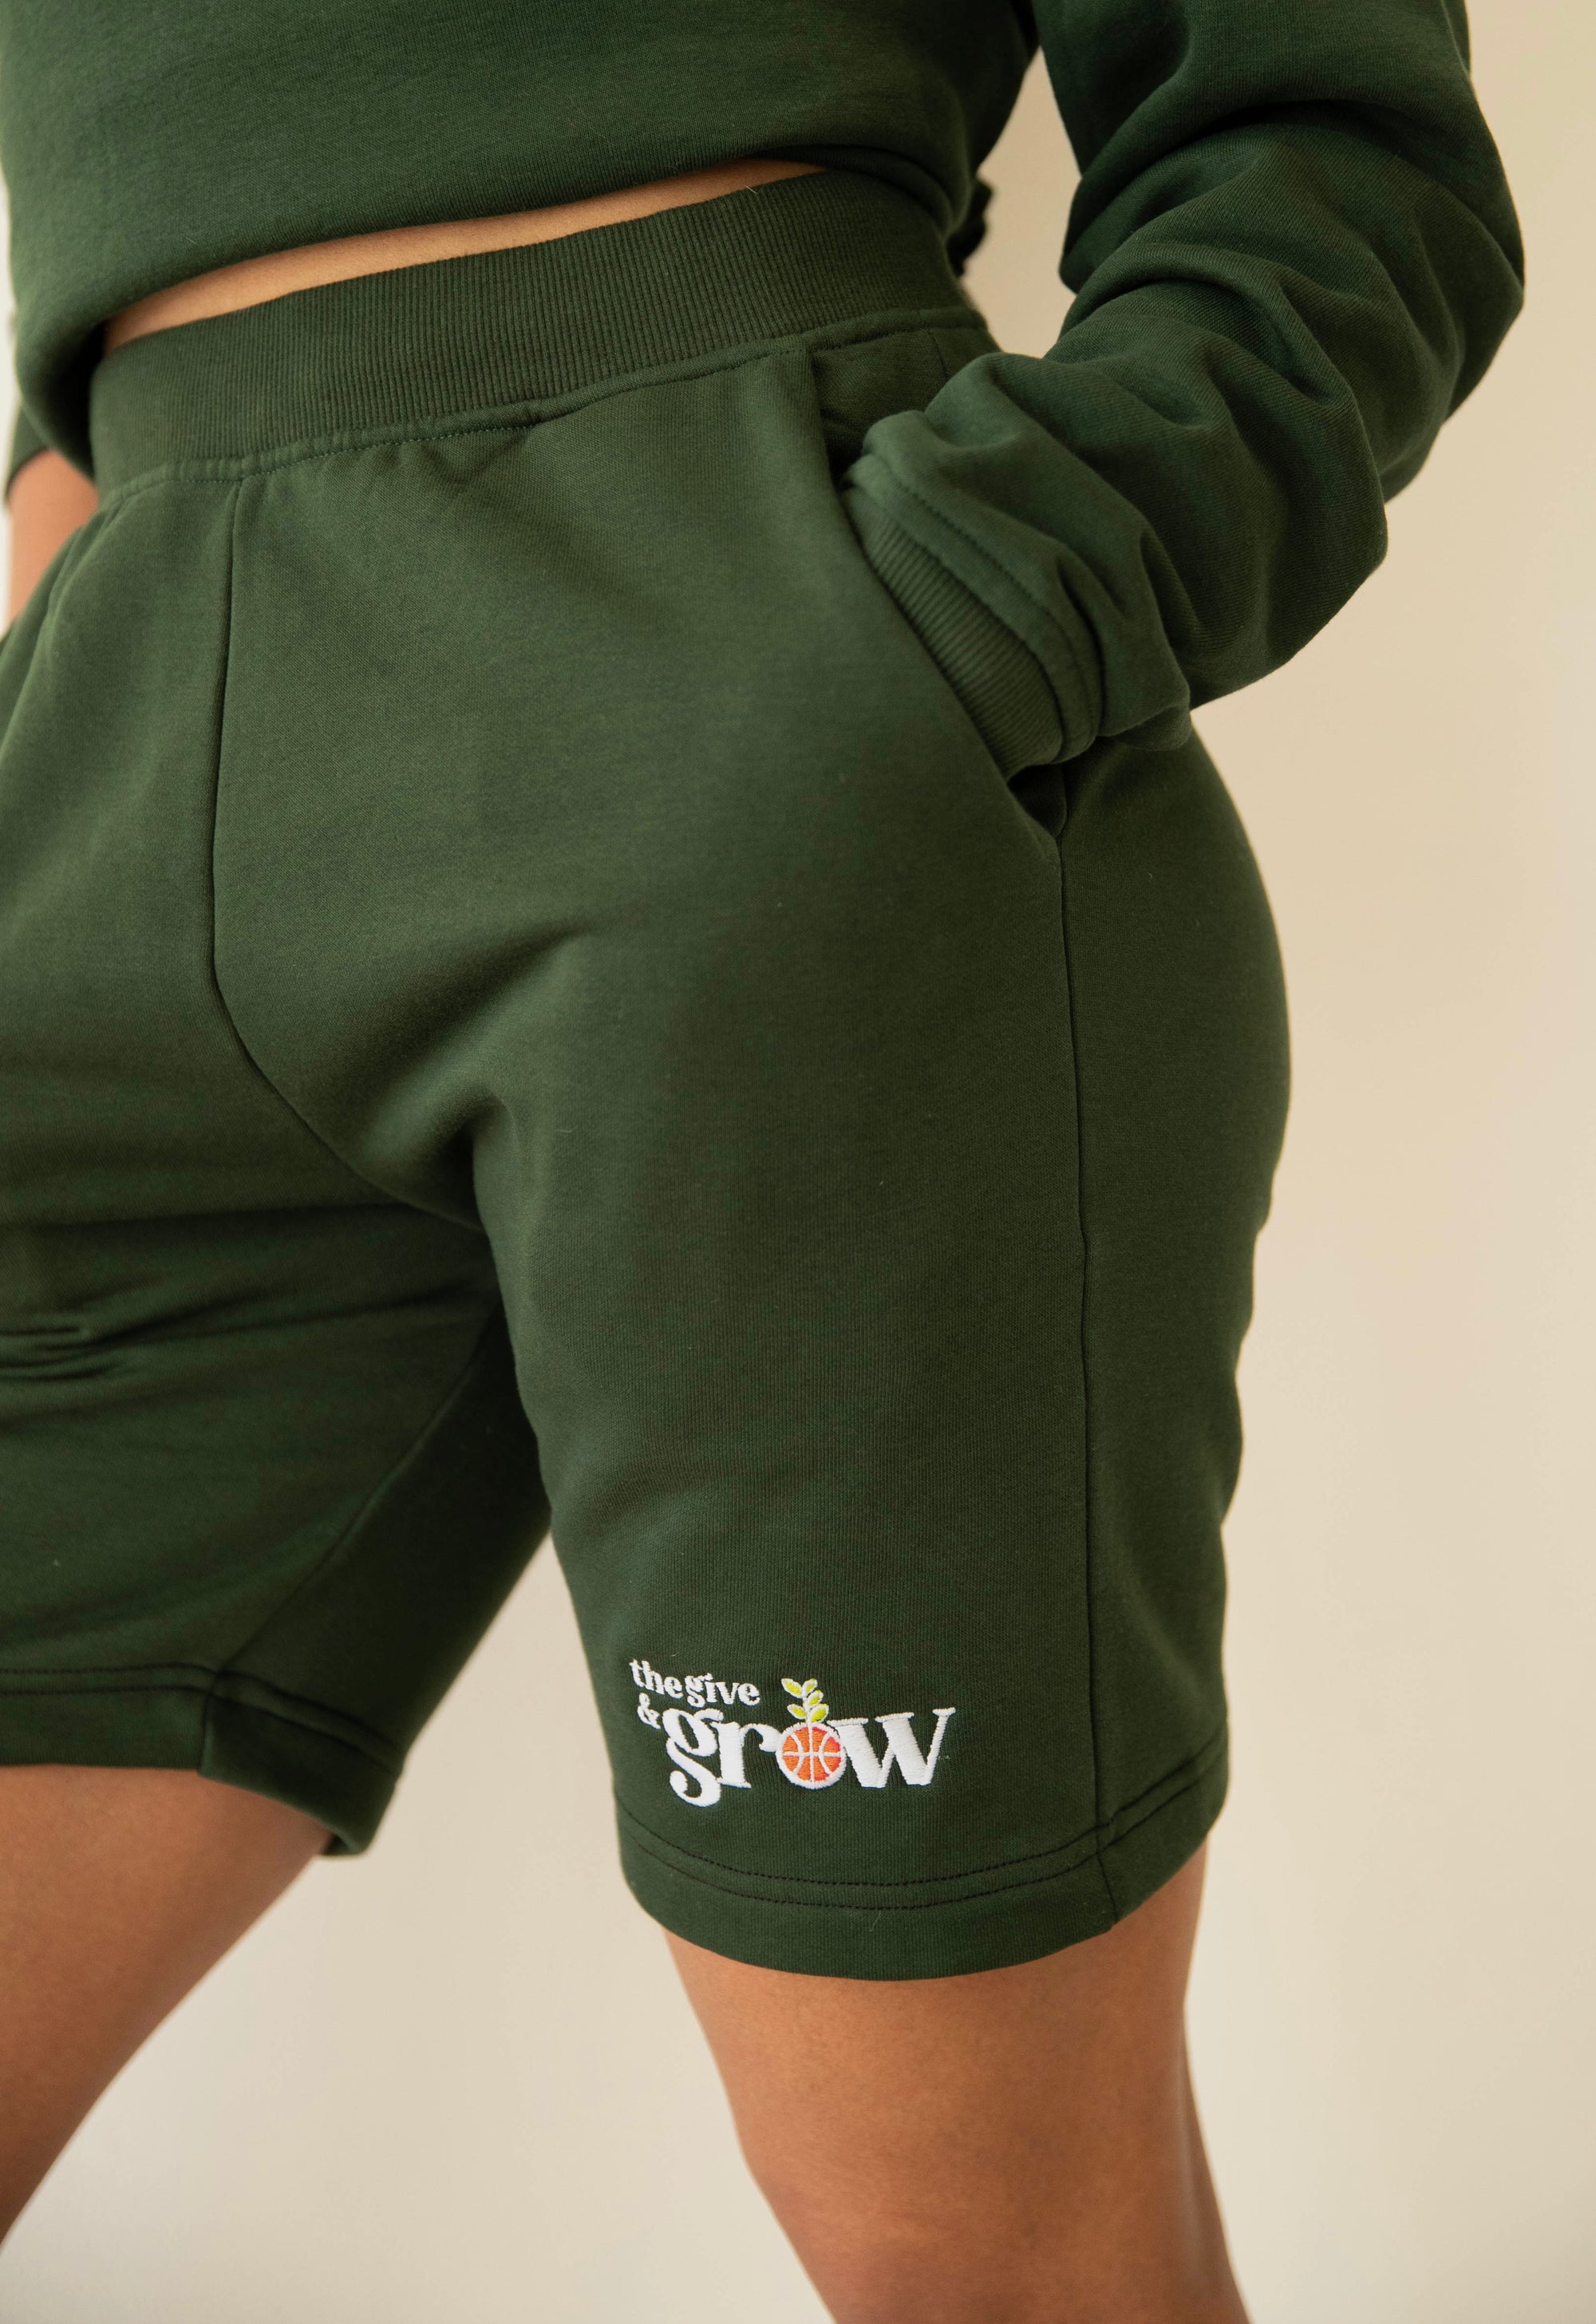 The Give and Grow Embroidered Sweatshorts